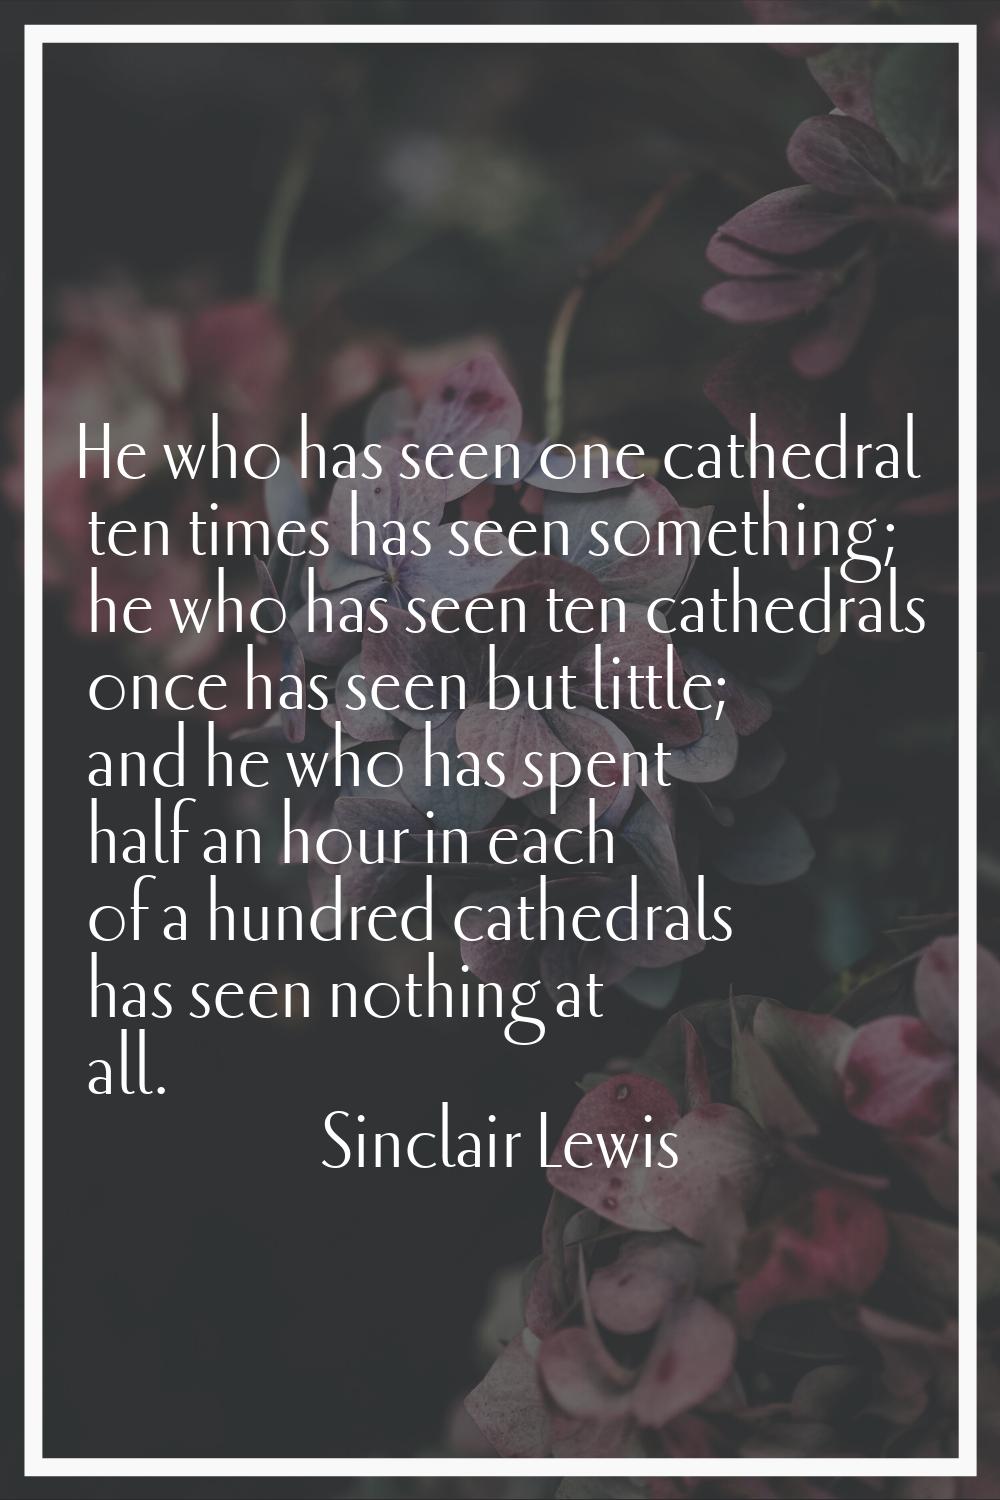 He who has seen one cathedral ten times has seen something; he who has seen ten cathedrals once has